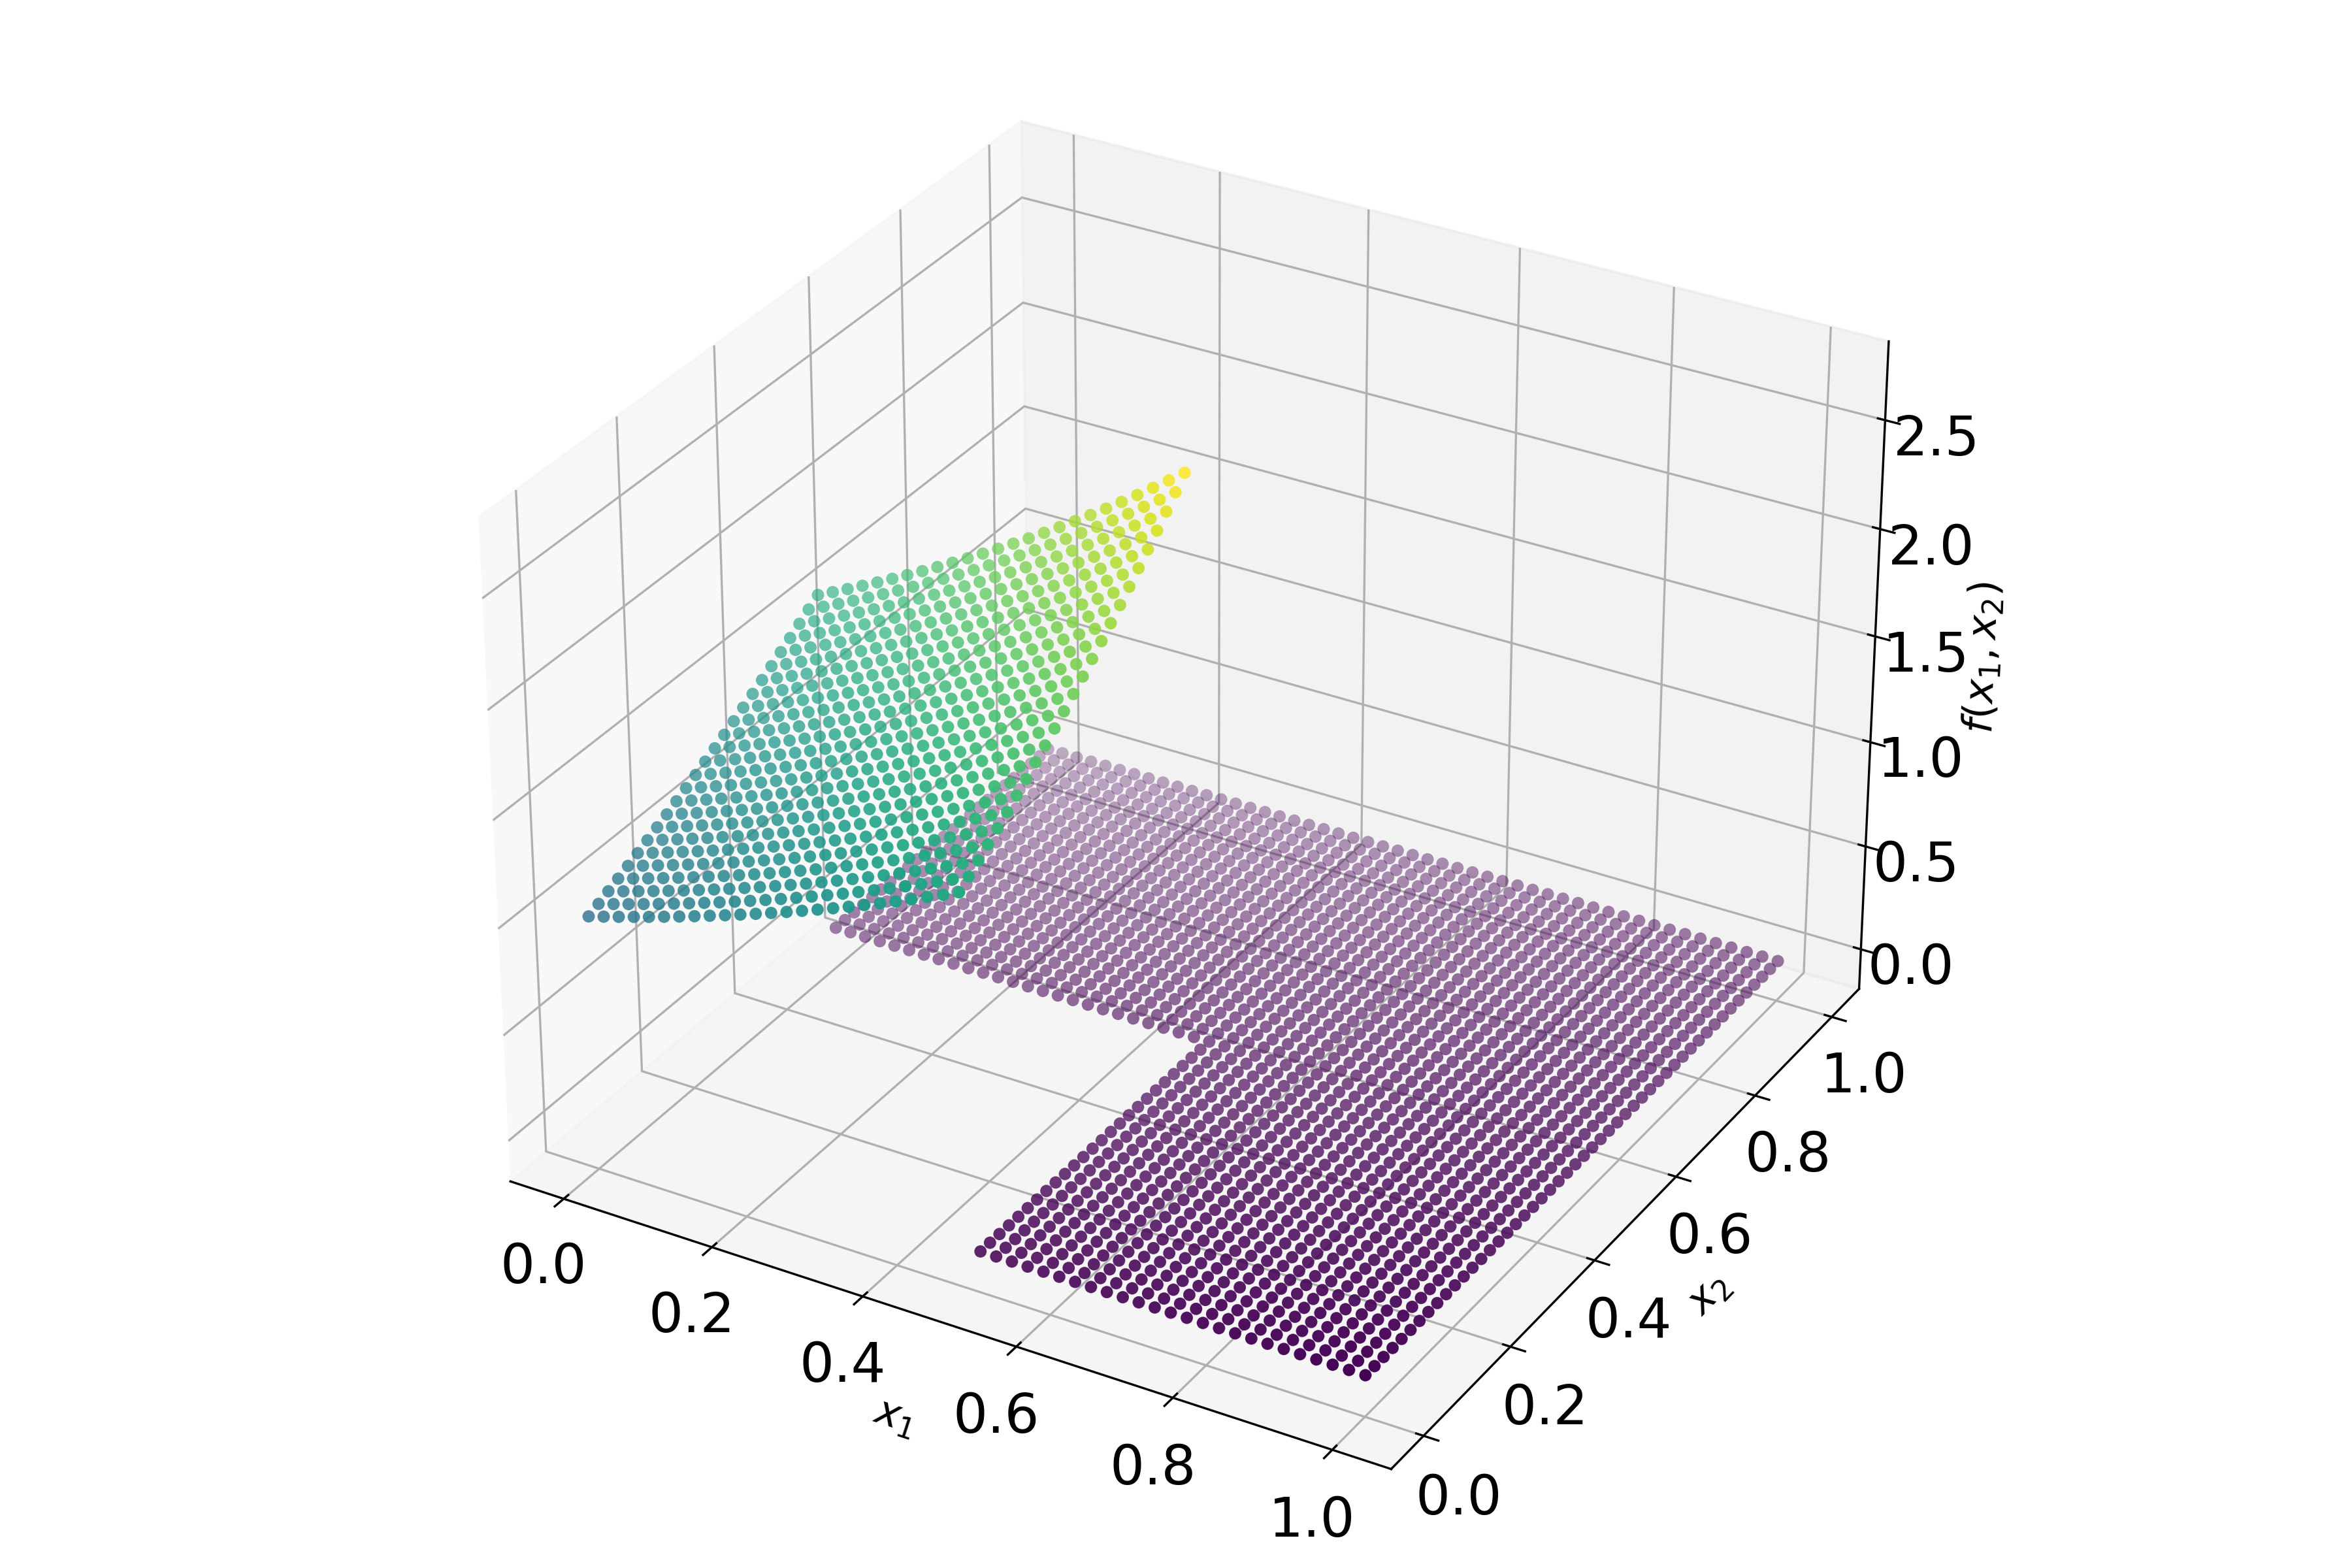 _images/fig-discontinuous-integrand.png